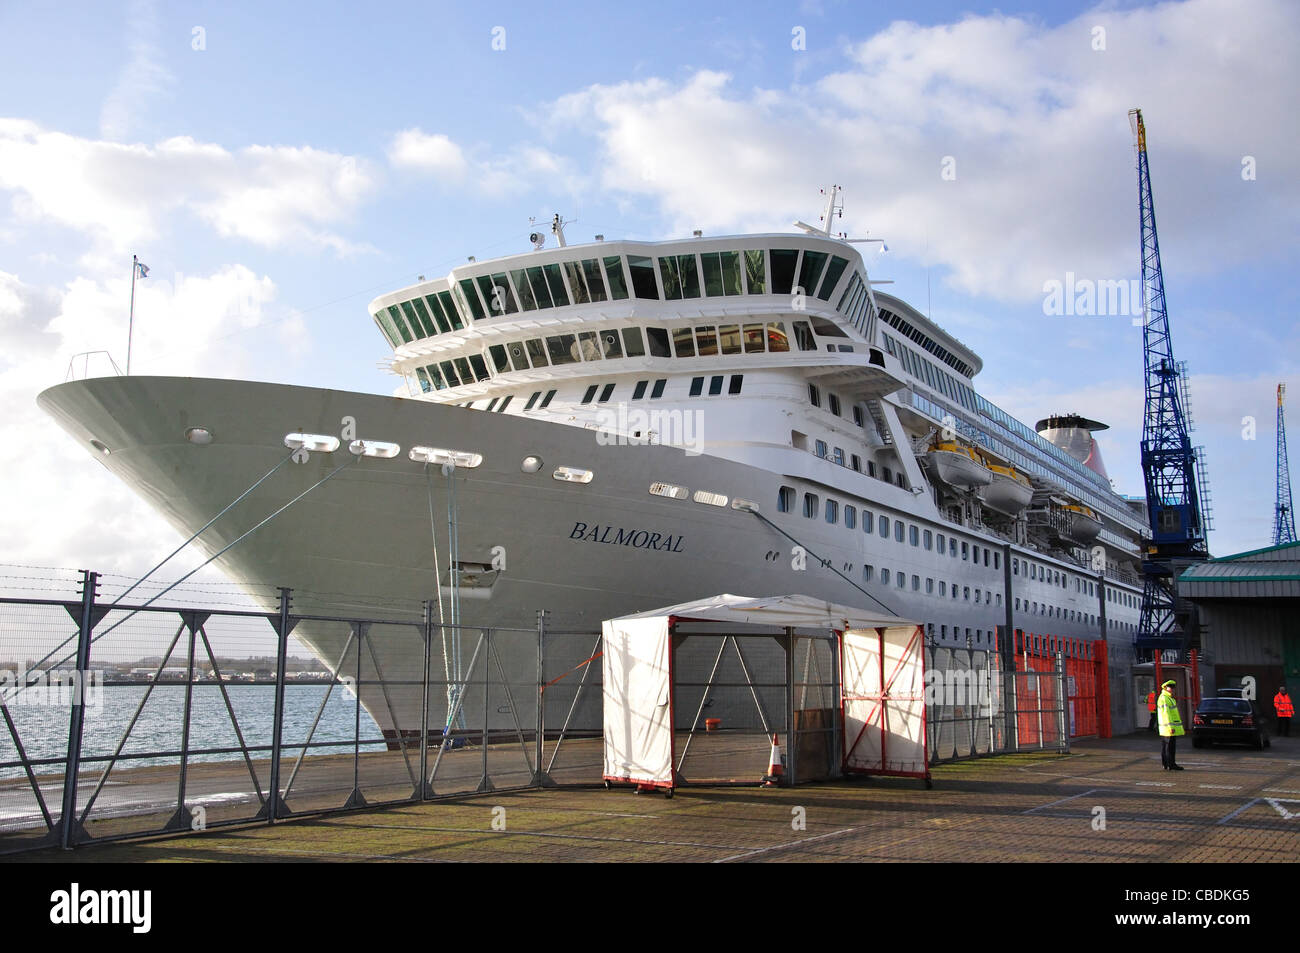 Fred Olsen M.S.Balmoral cruise ship berthed in Southampton, Hampshire, England, United Kingdom Stock Photo